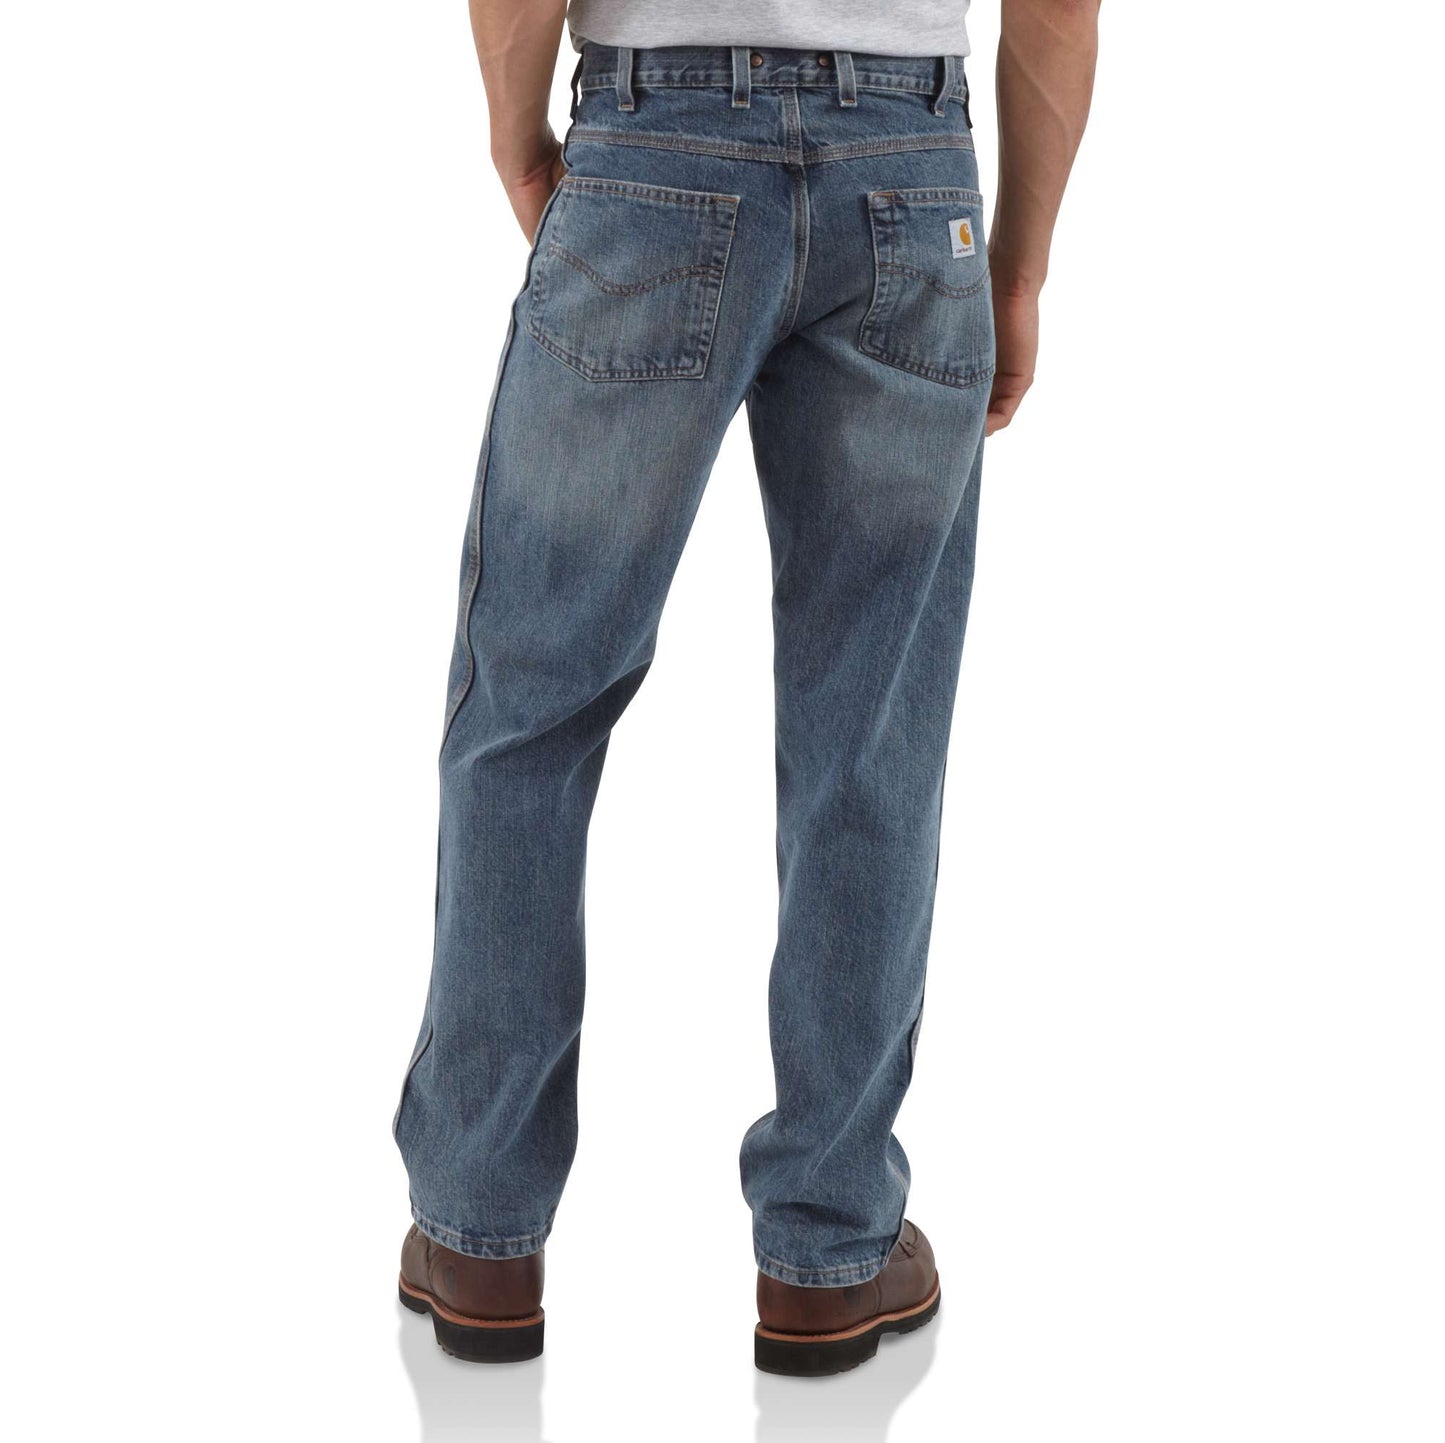 Series 1889® Relaxed-Fit Jean - Straight-Leg